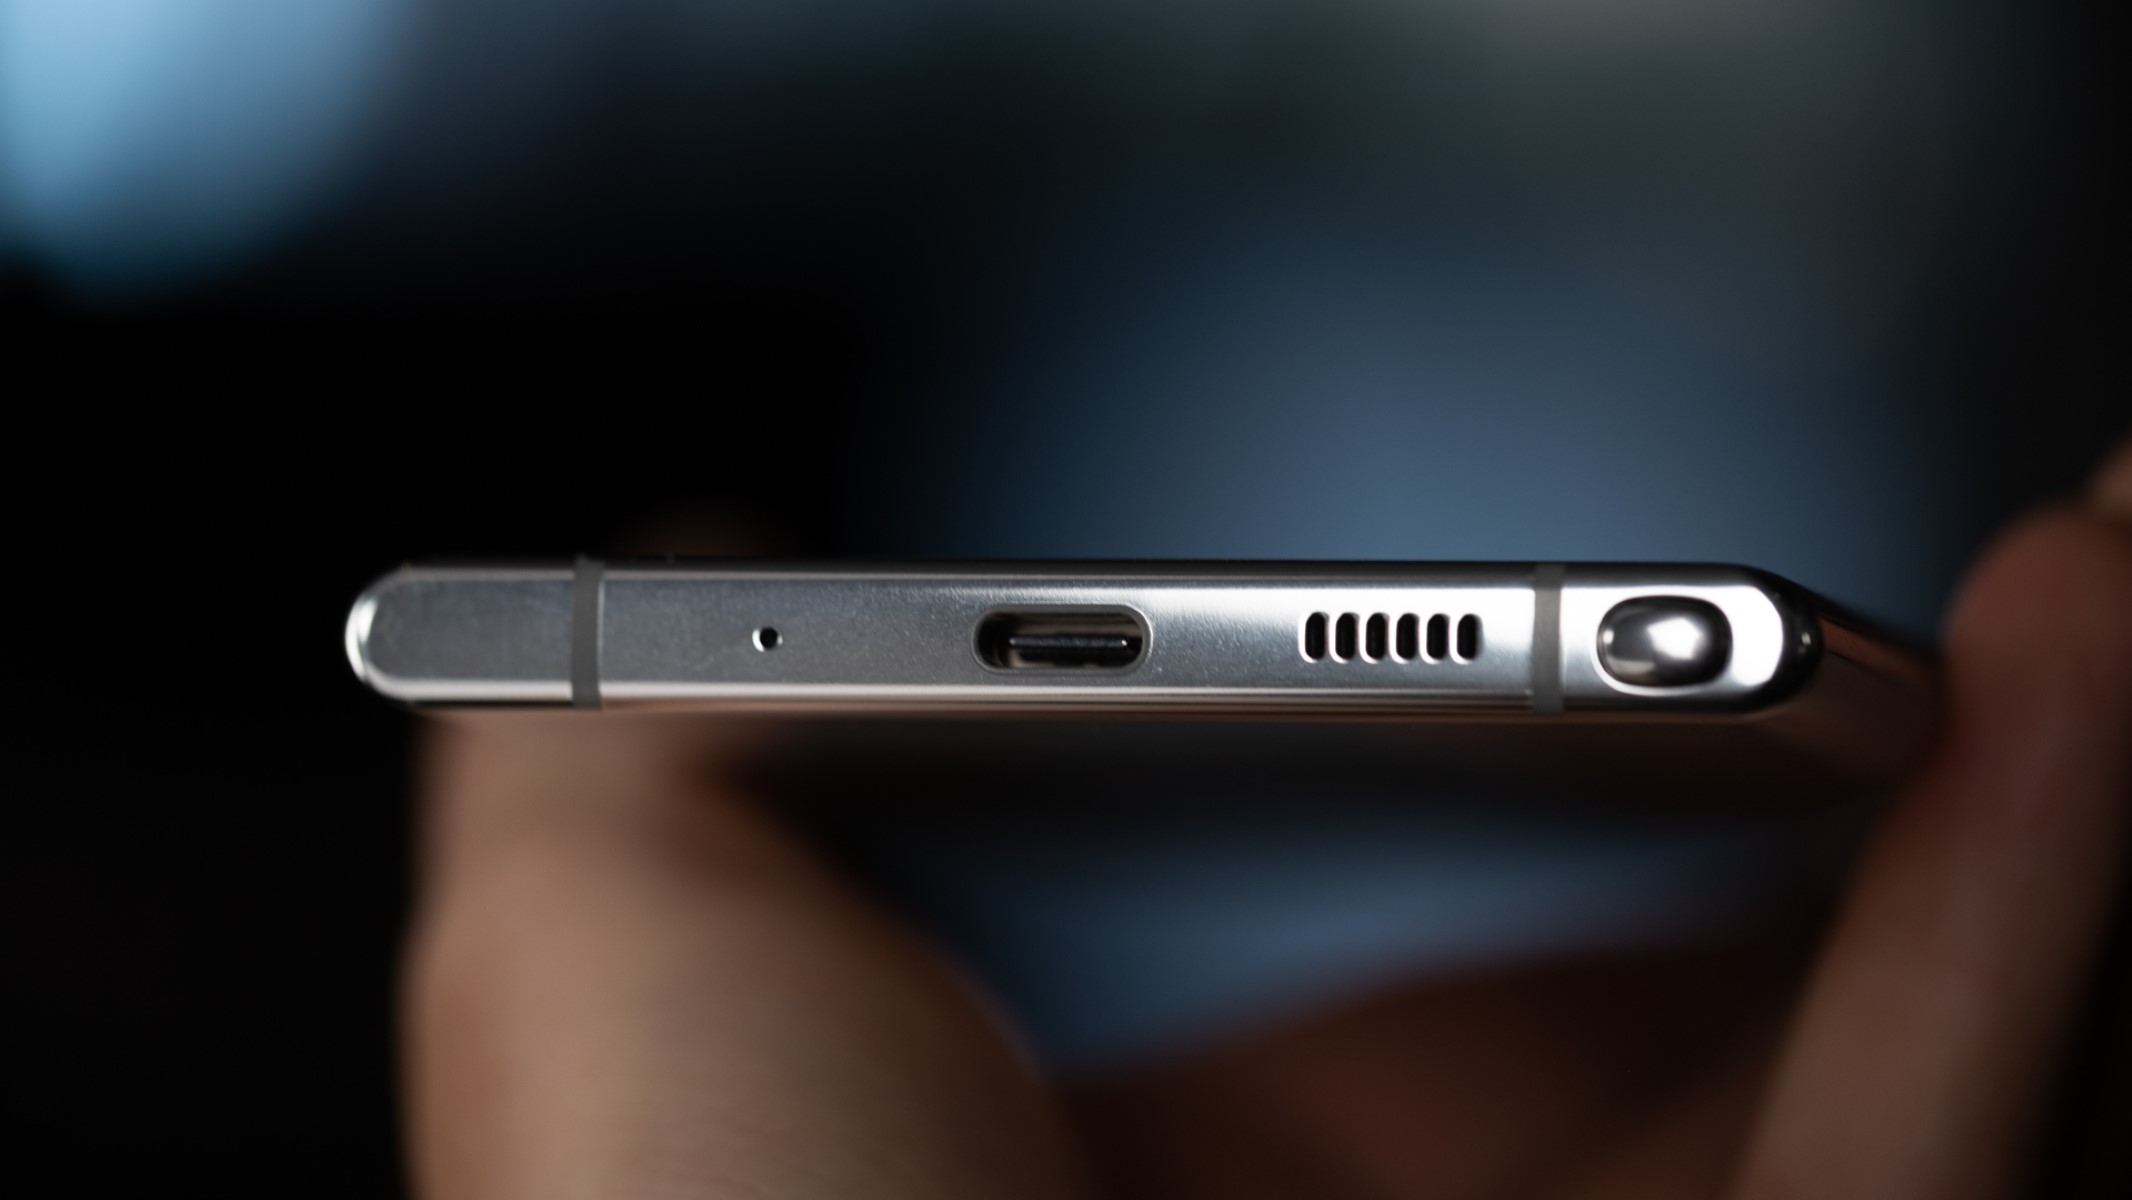 behind-the-tech-samsungs-waterproofing-of-the-headphone-jack-explained